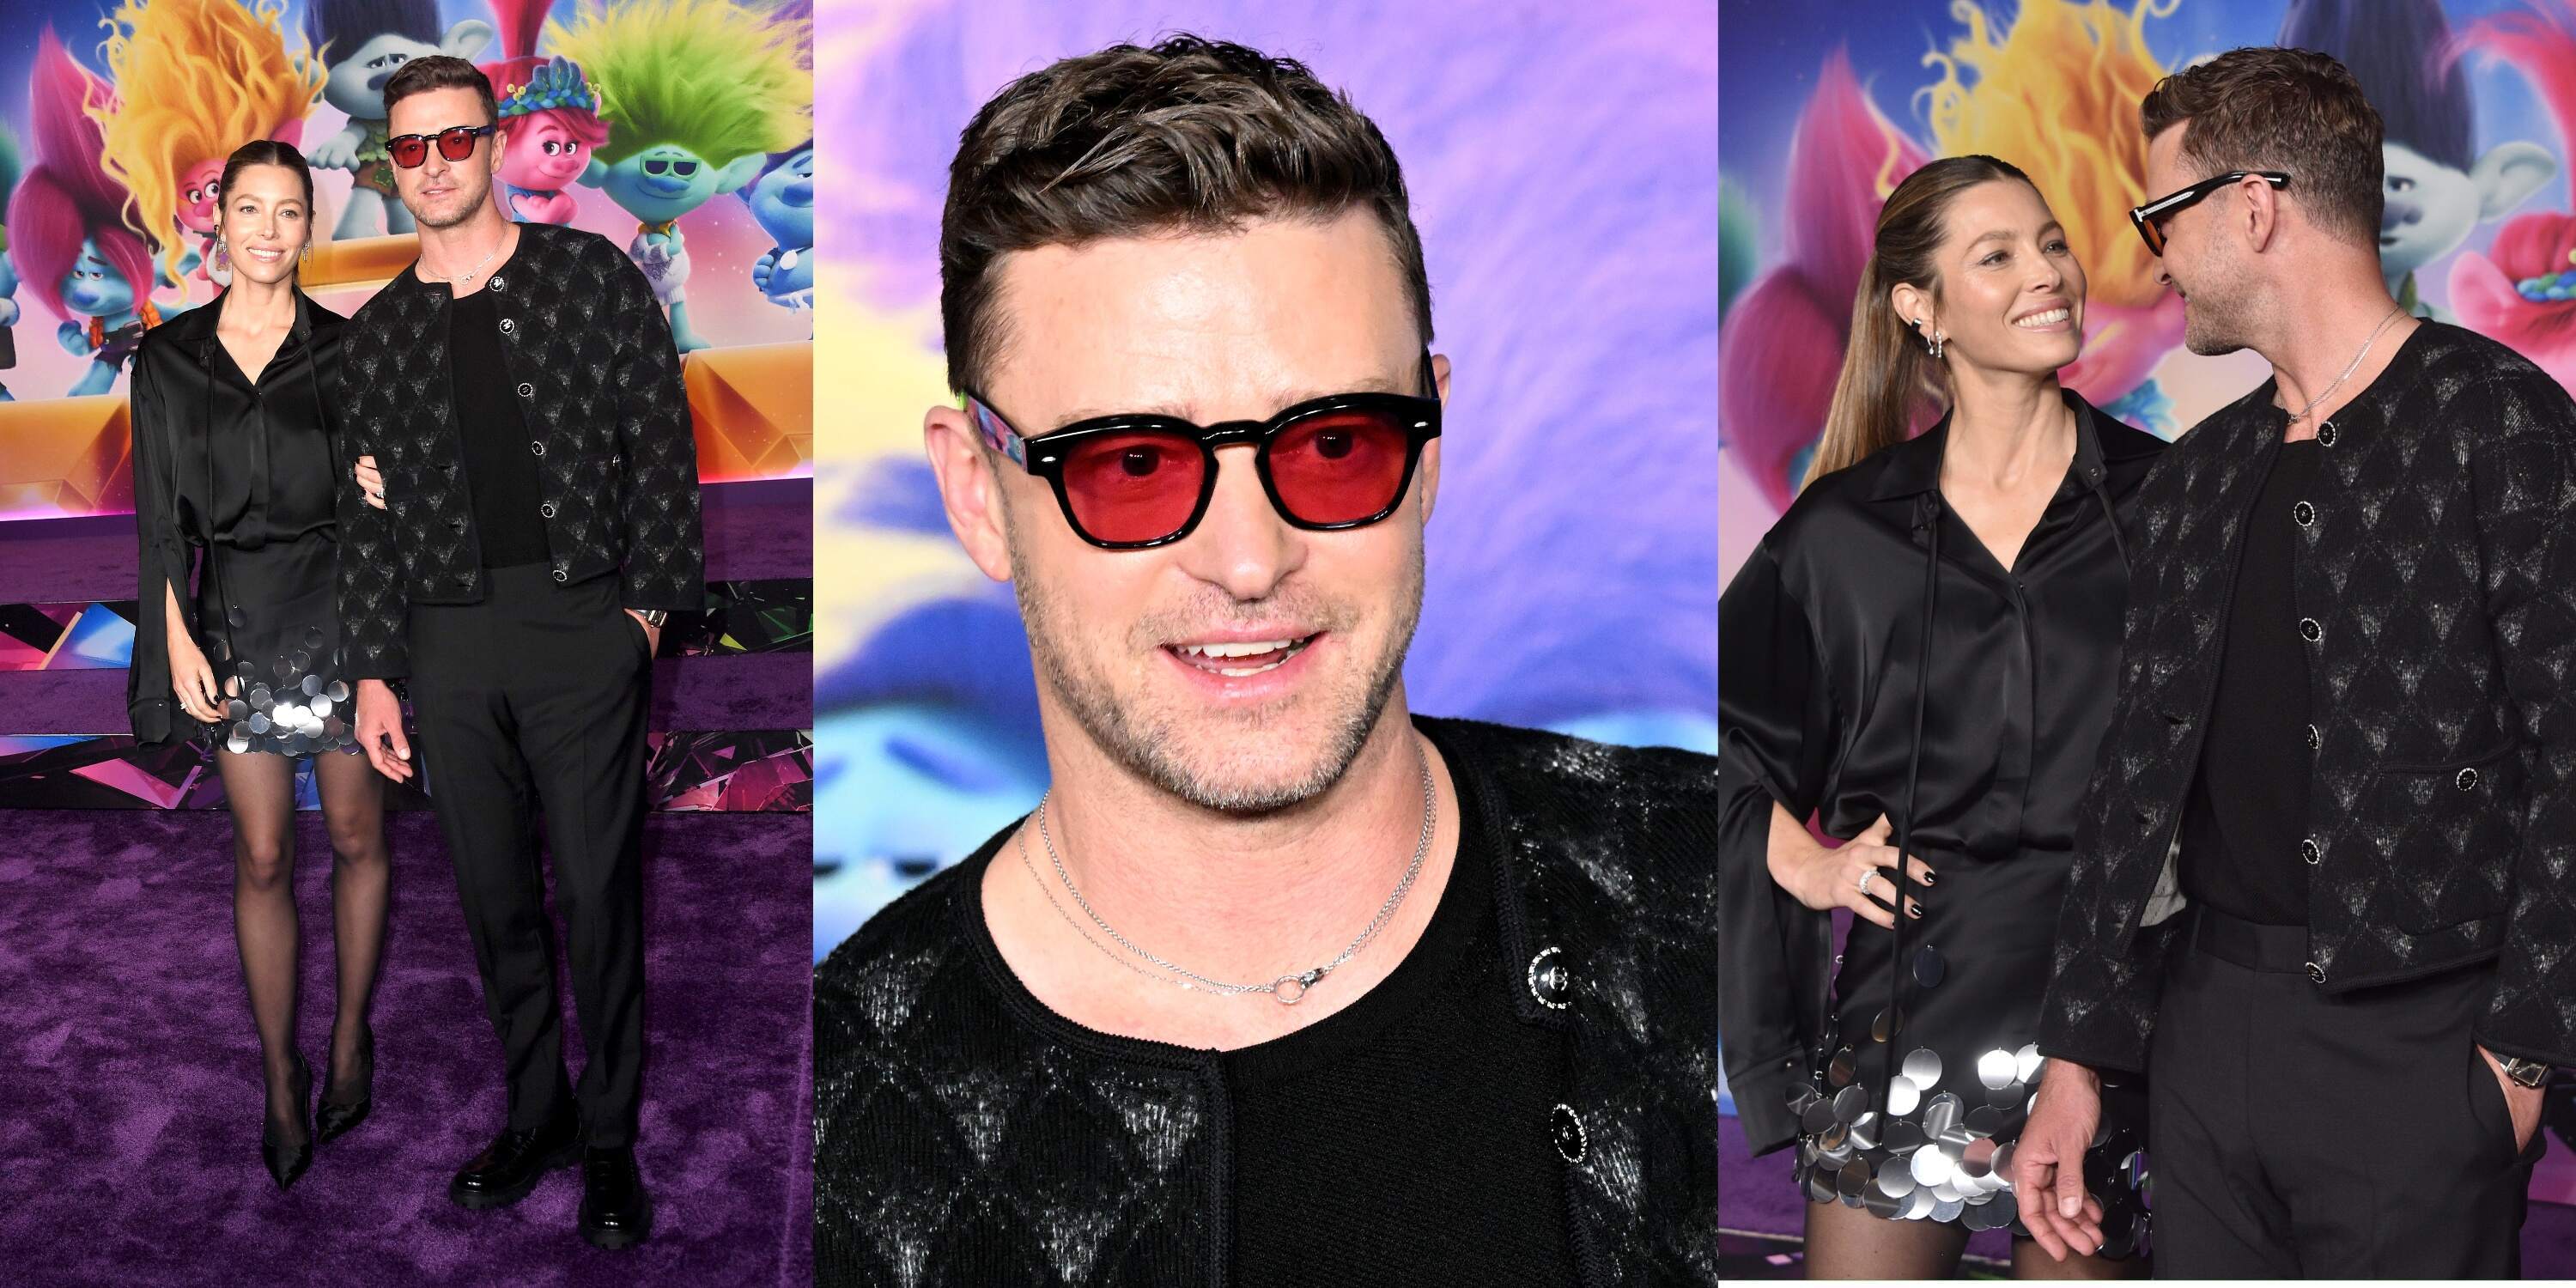 Jessica Biel and Justin TImberlake smile together on the purple carpet during the premiere of Trolls: Band Together